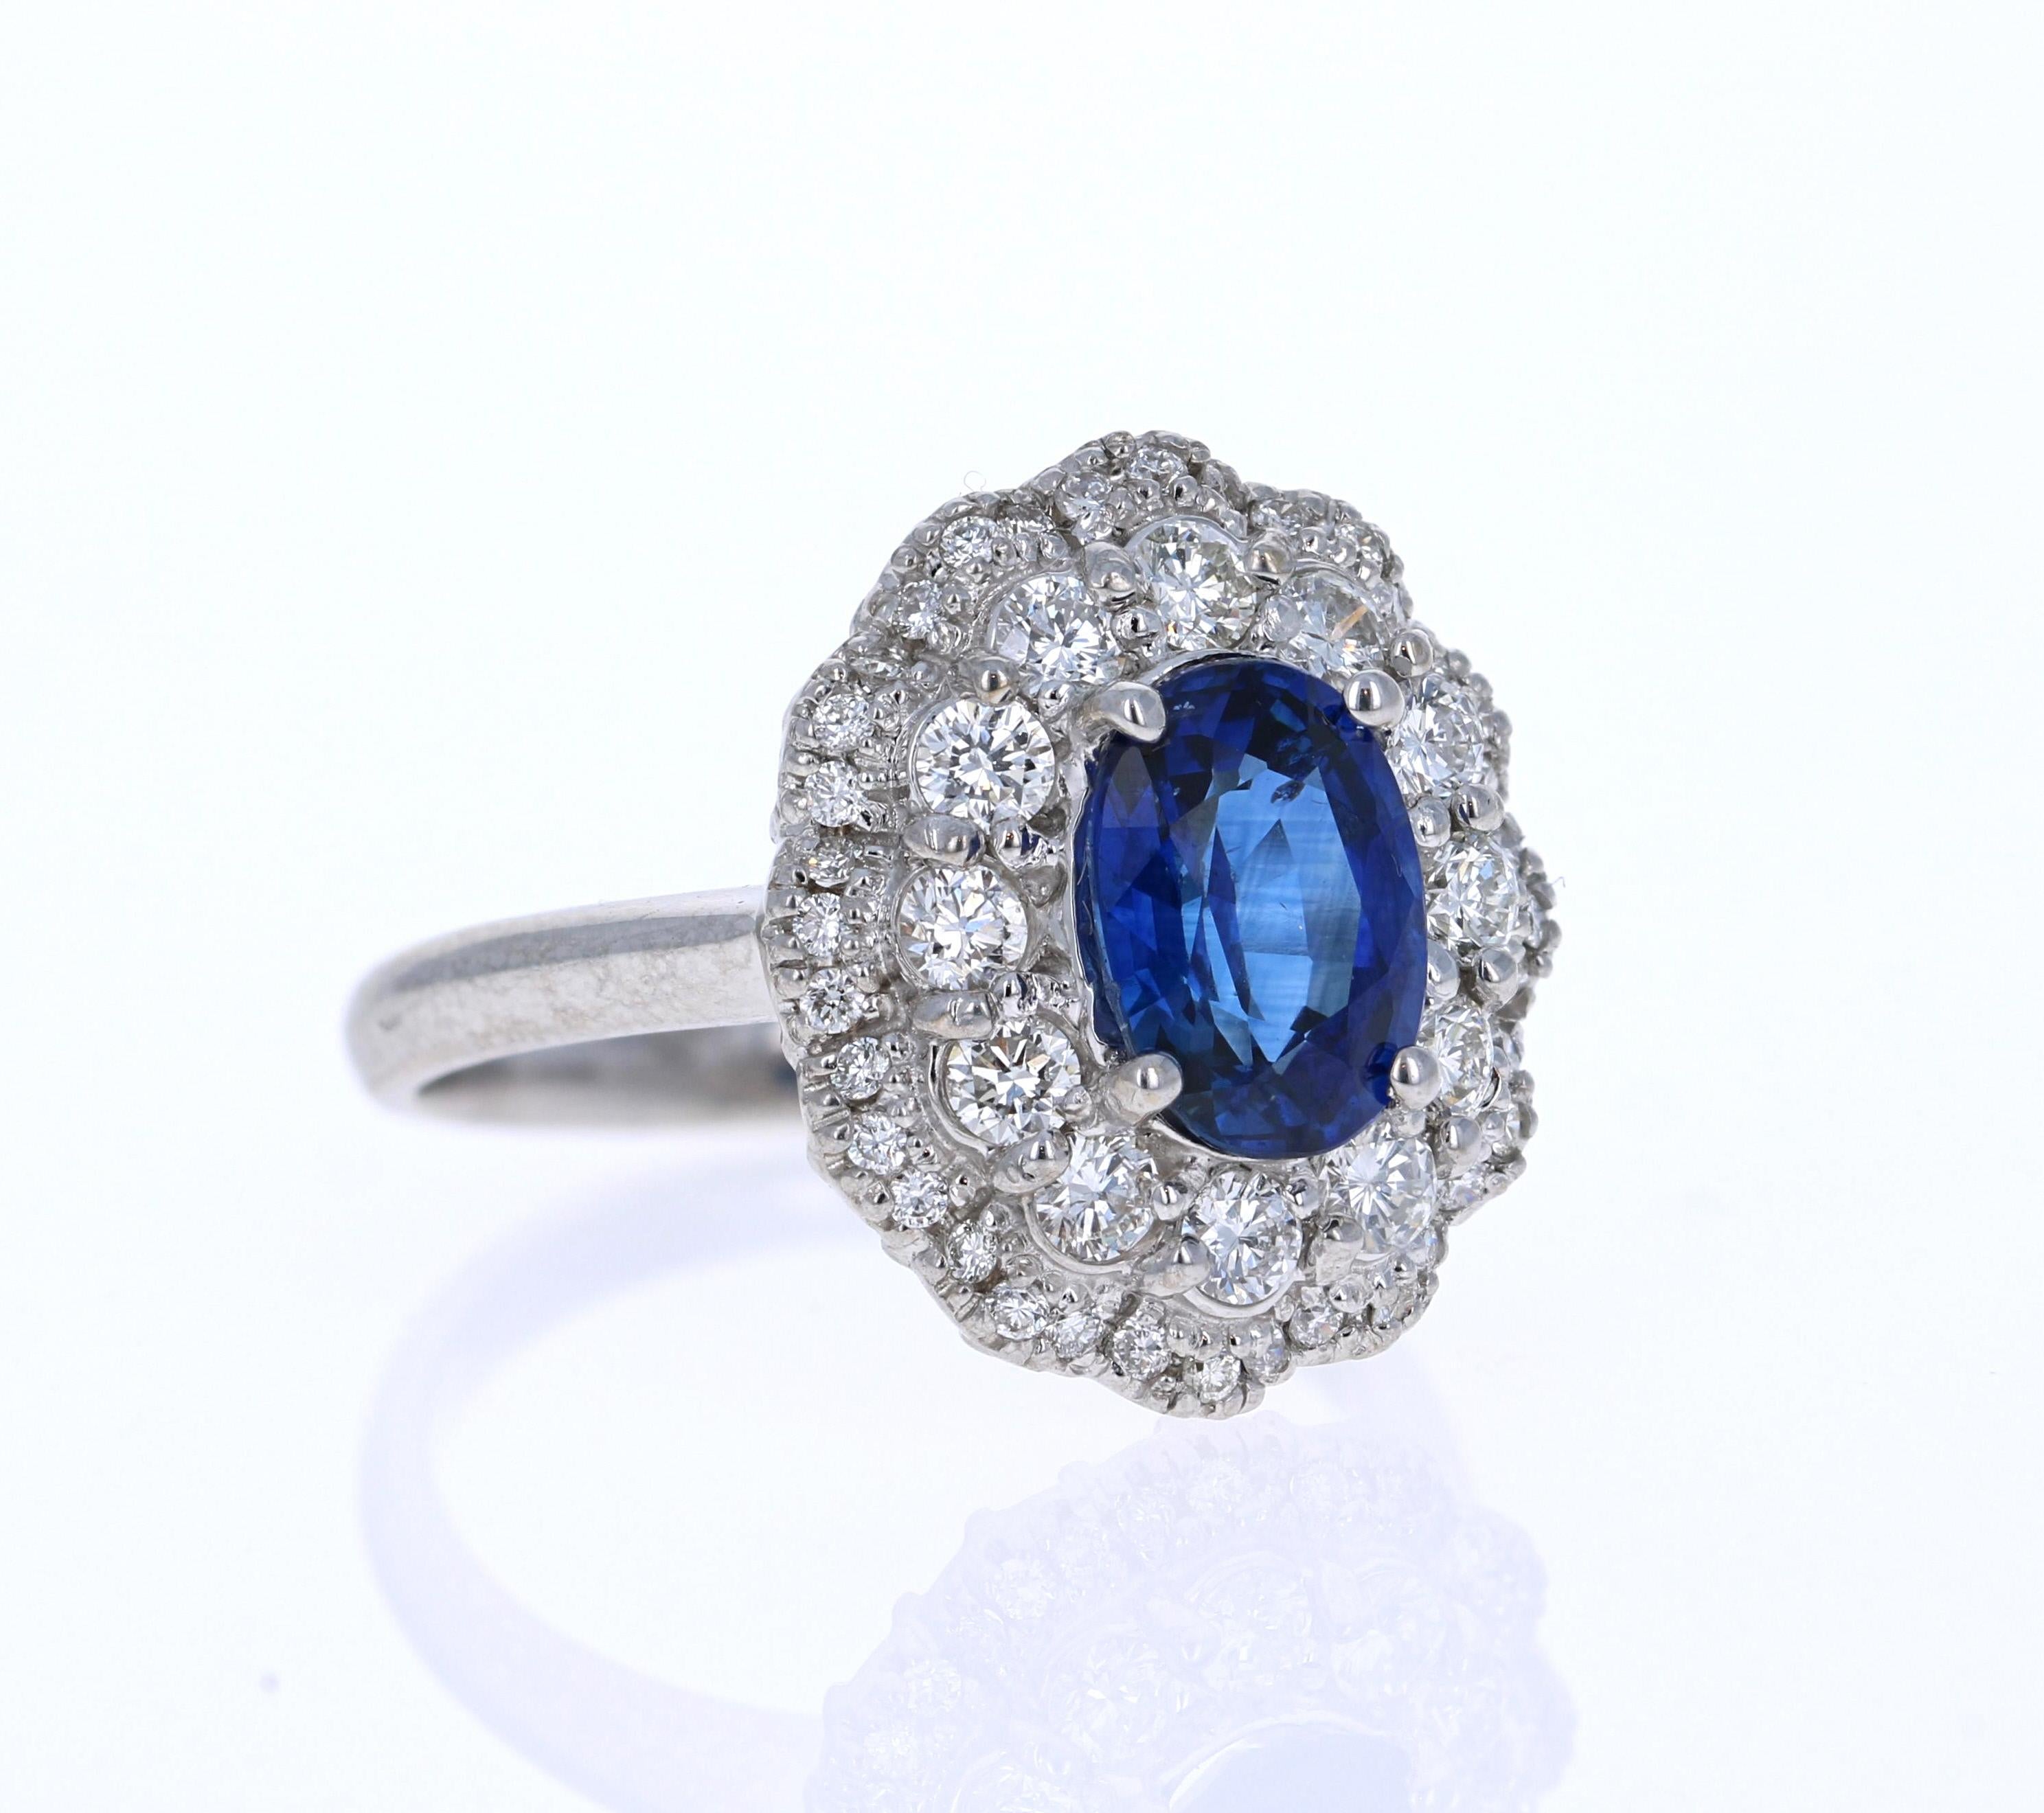 Contemporary GIA Certified 3.53 Carat Blue Sapphire Diamond 18 Karat White Gold Ring For Sale